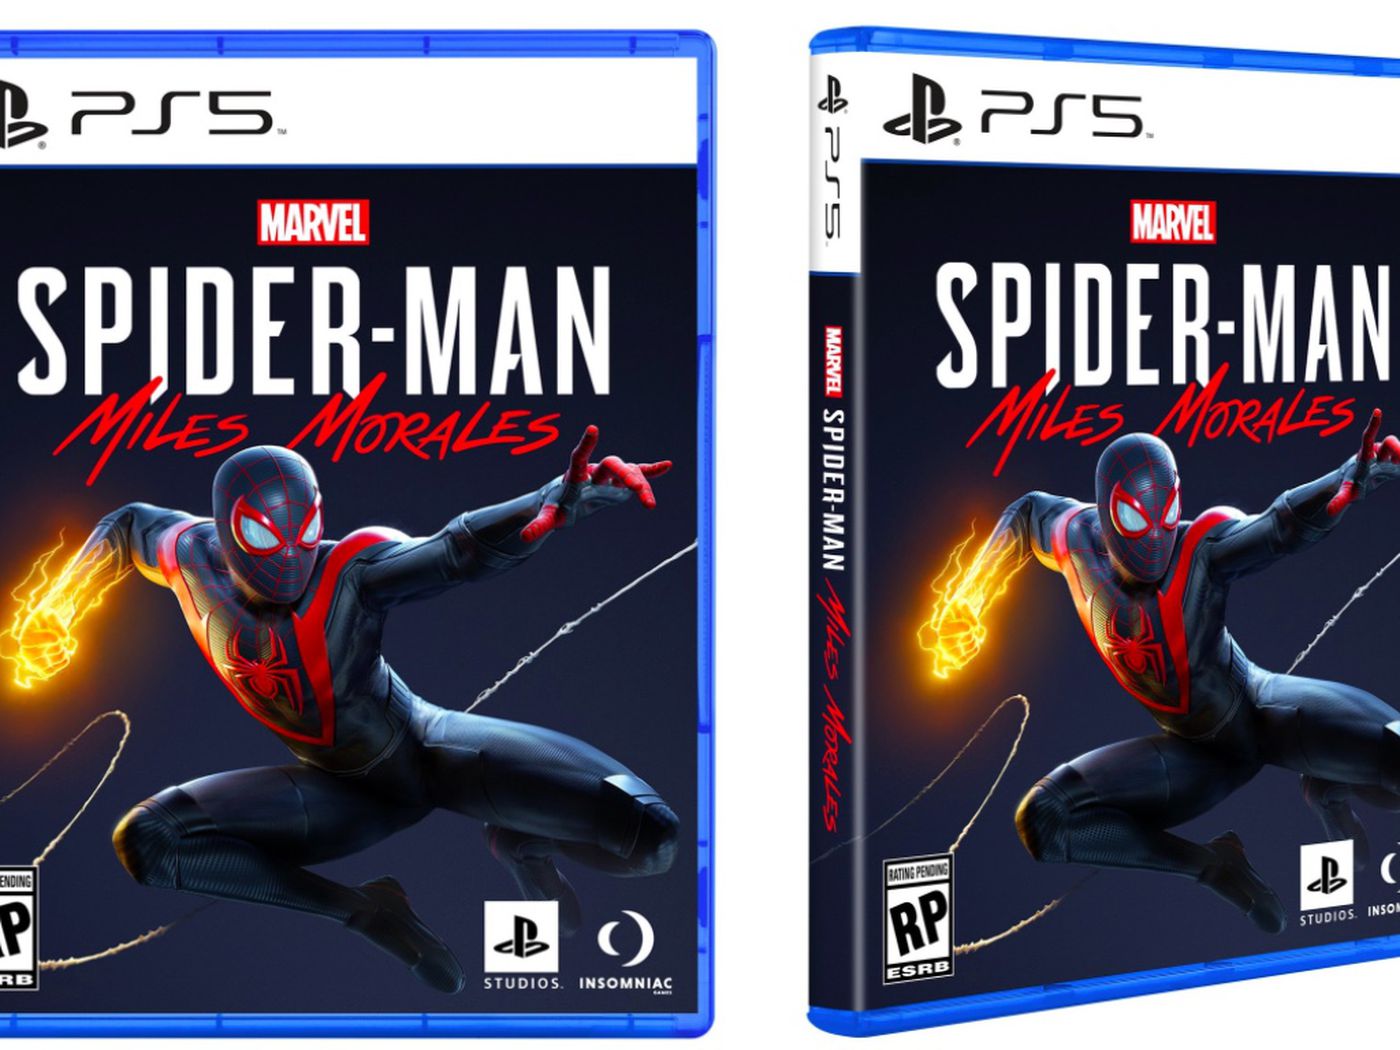 PlayStation 5: First PS5 game box art for Spider-Man Miles Morales